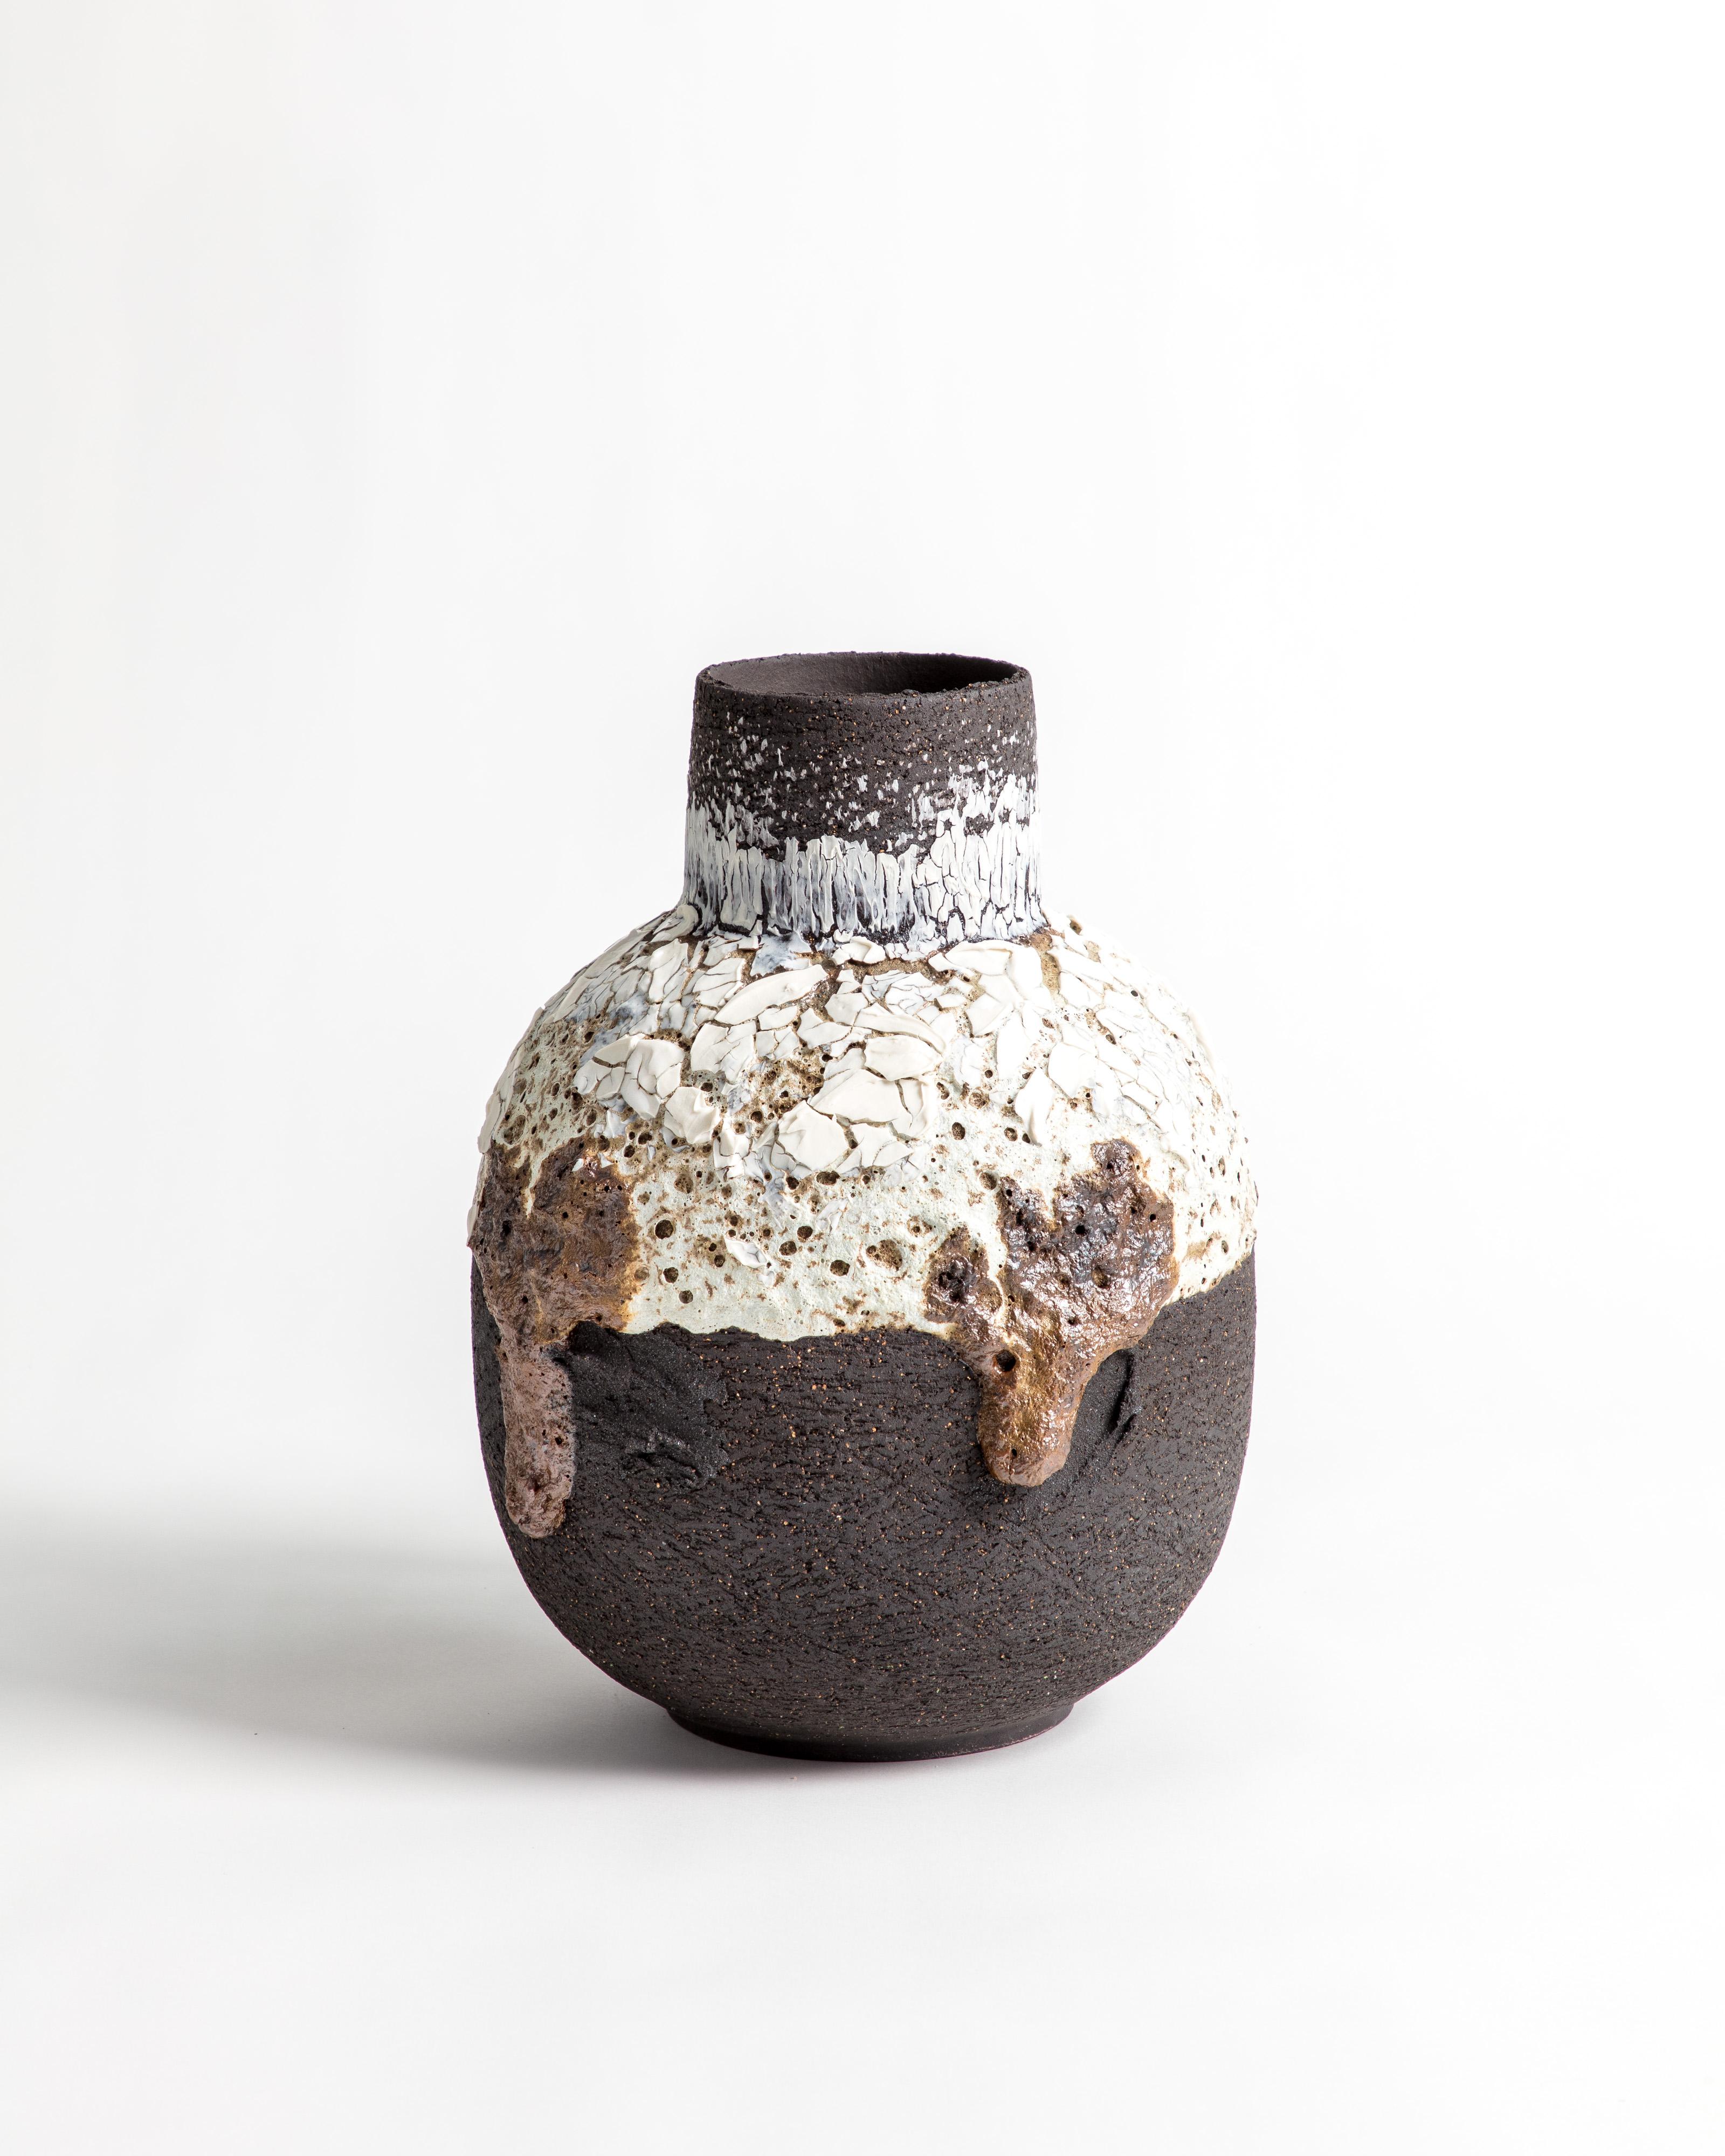 An individual Rounded black, white and brown volcanic vessel with added lava stone.

Inspiration for the piece comes from the clay itself and the chemical relationships that glaze and volcanic matter create. Travels around the world, particularly